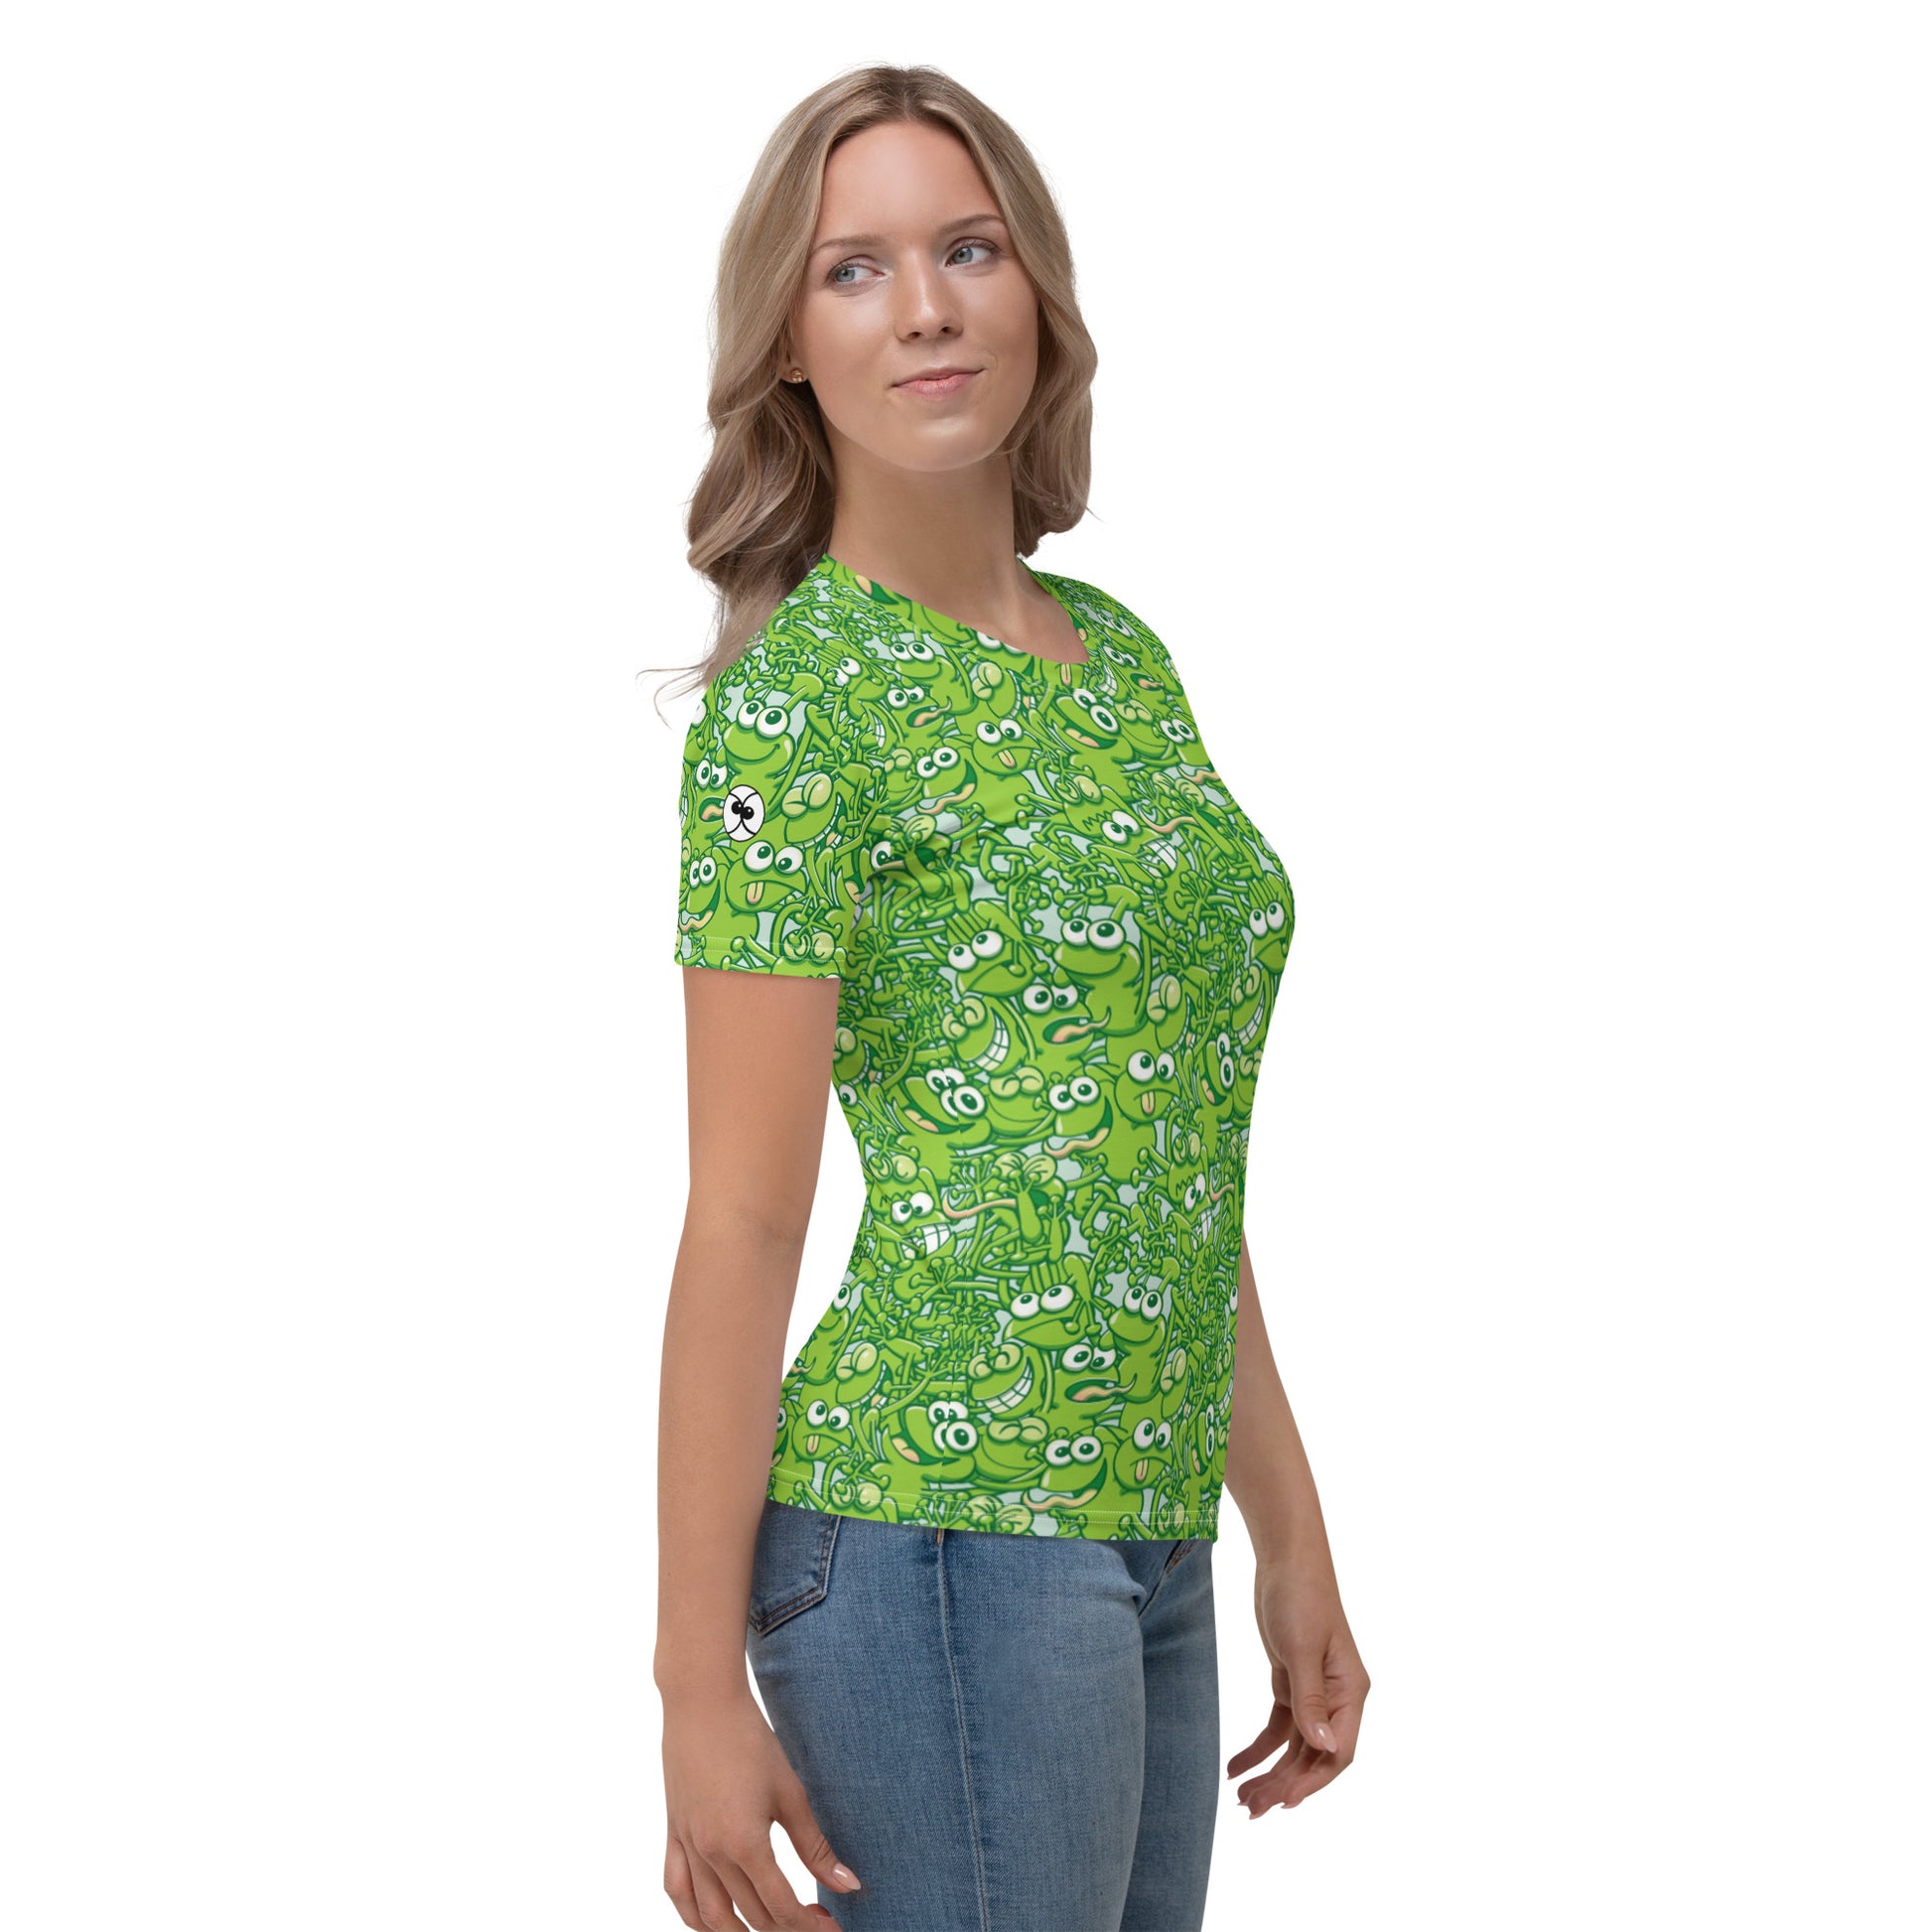 A tangled army of happy green frogs appears when the rain stops Women's T-shirt. Side view